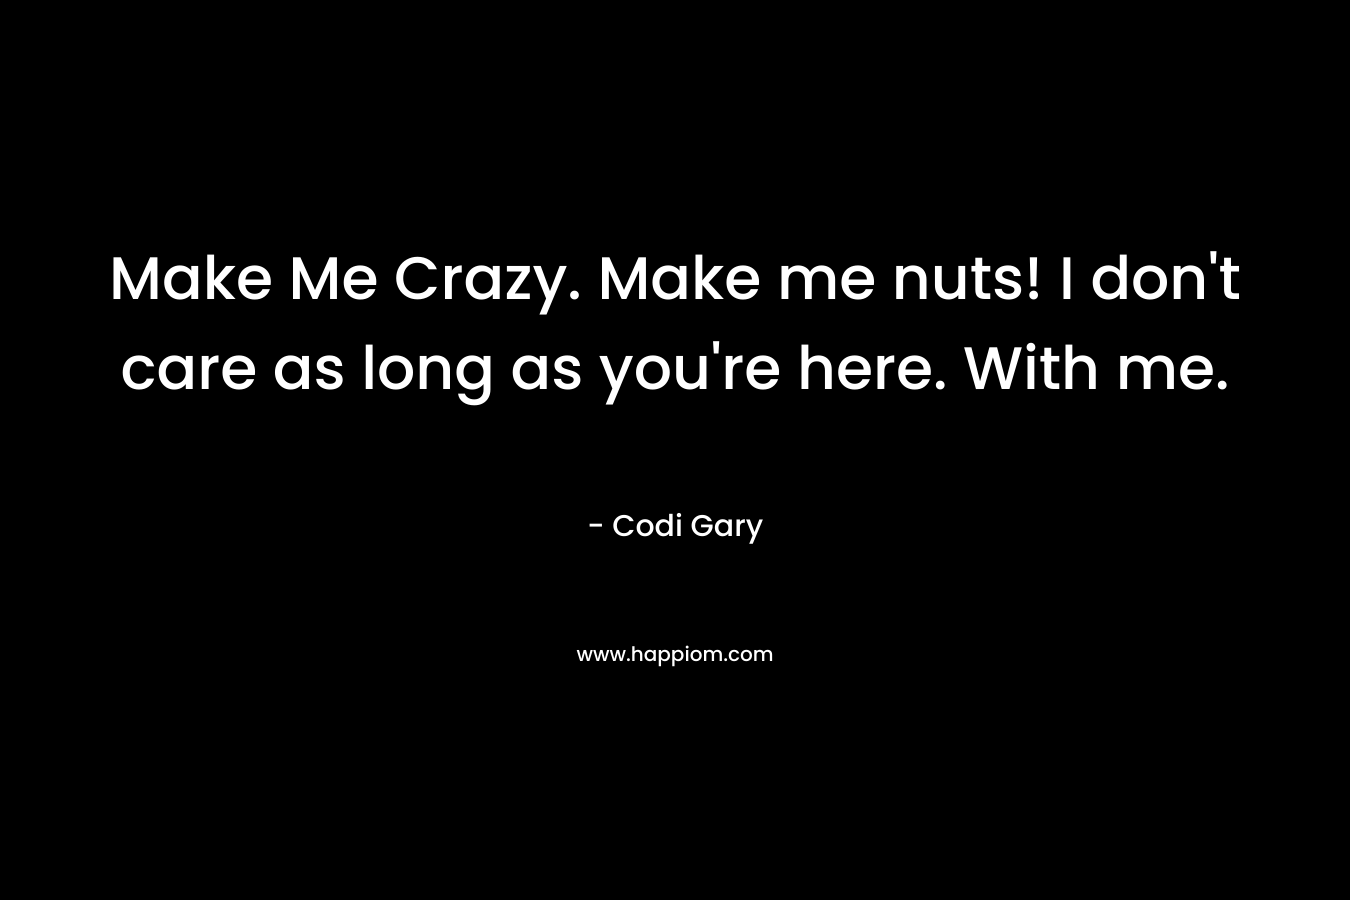 Make Me Crazy. Make me nuts! I don’t care as long as you’re here. With me. – Codi Gary